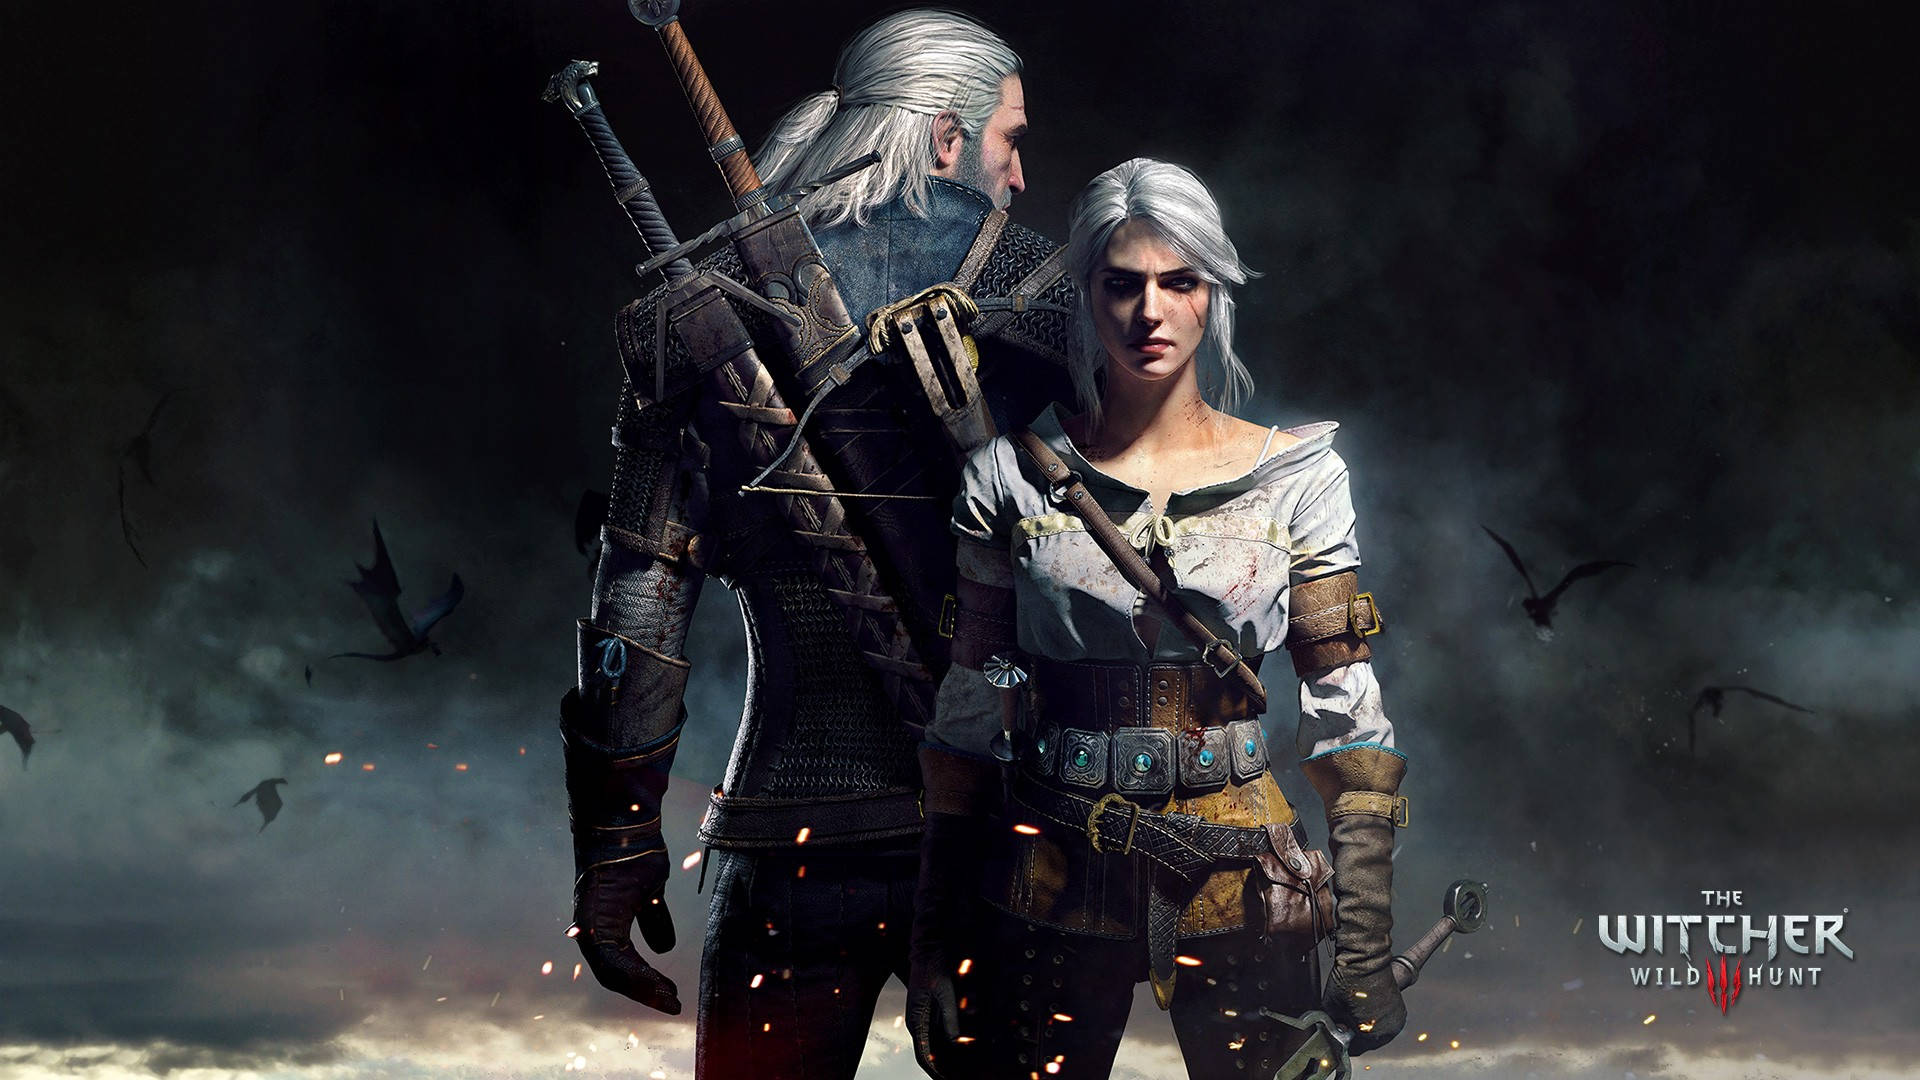 Ciri and Geralt united in the world of The Witcher 3 Wallpaper